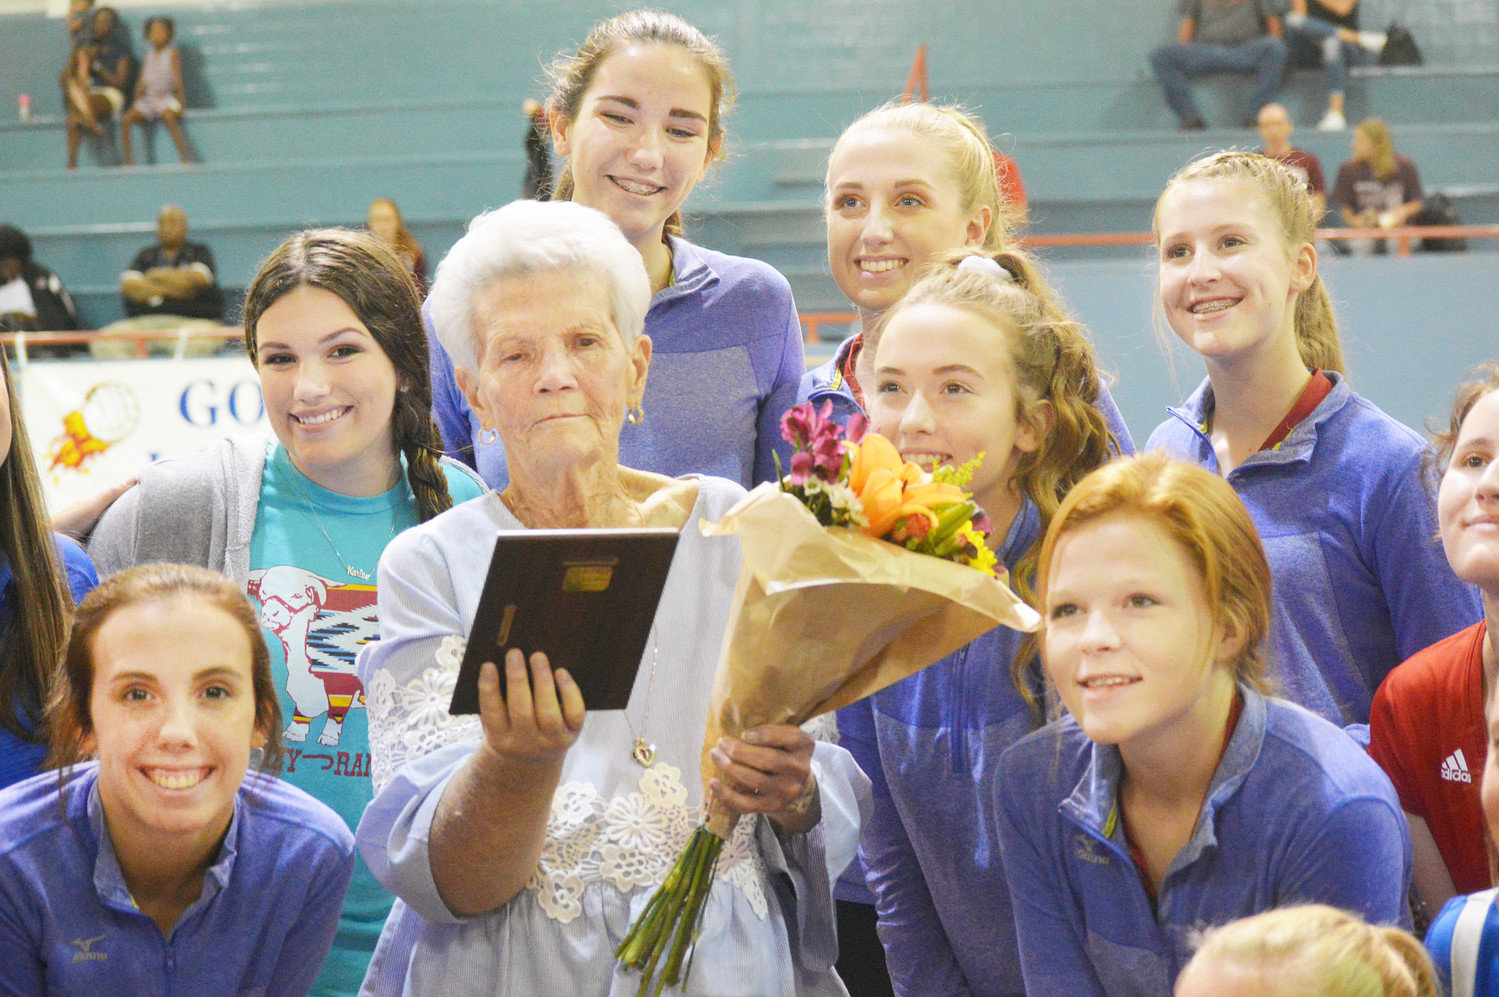 Former Quitman High School educator and coach Pat Neighbors is surrounded by the current Lady Bulldog volleyball team as she receives a plaque and flowers when being honored prior to the game last Tuesday at Ballard Memorial Gym.